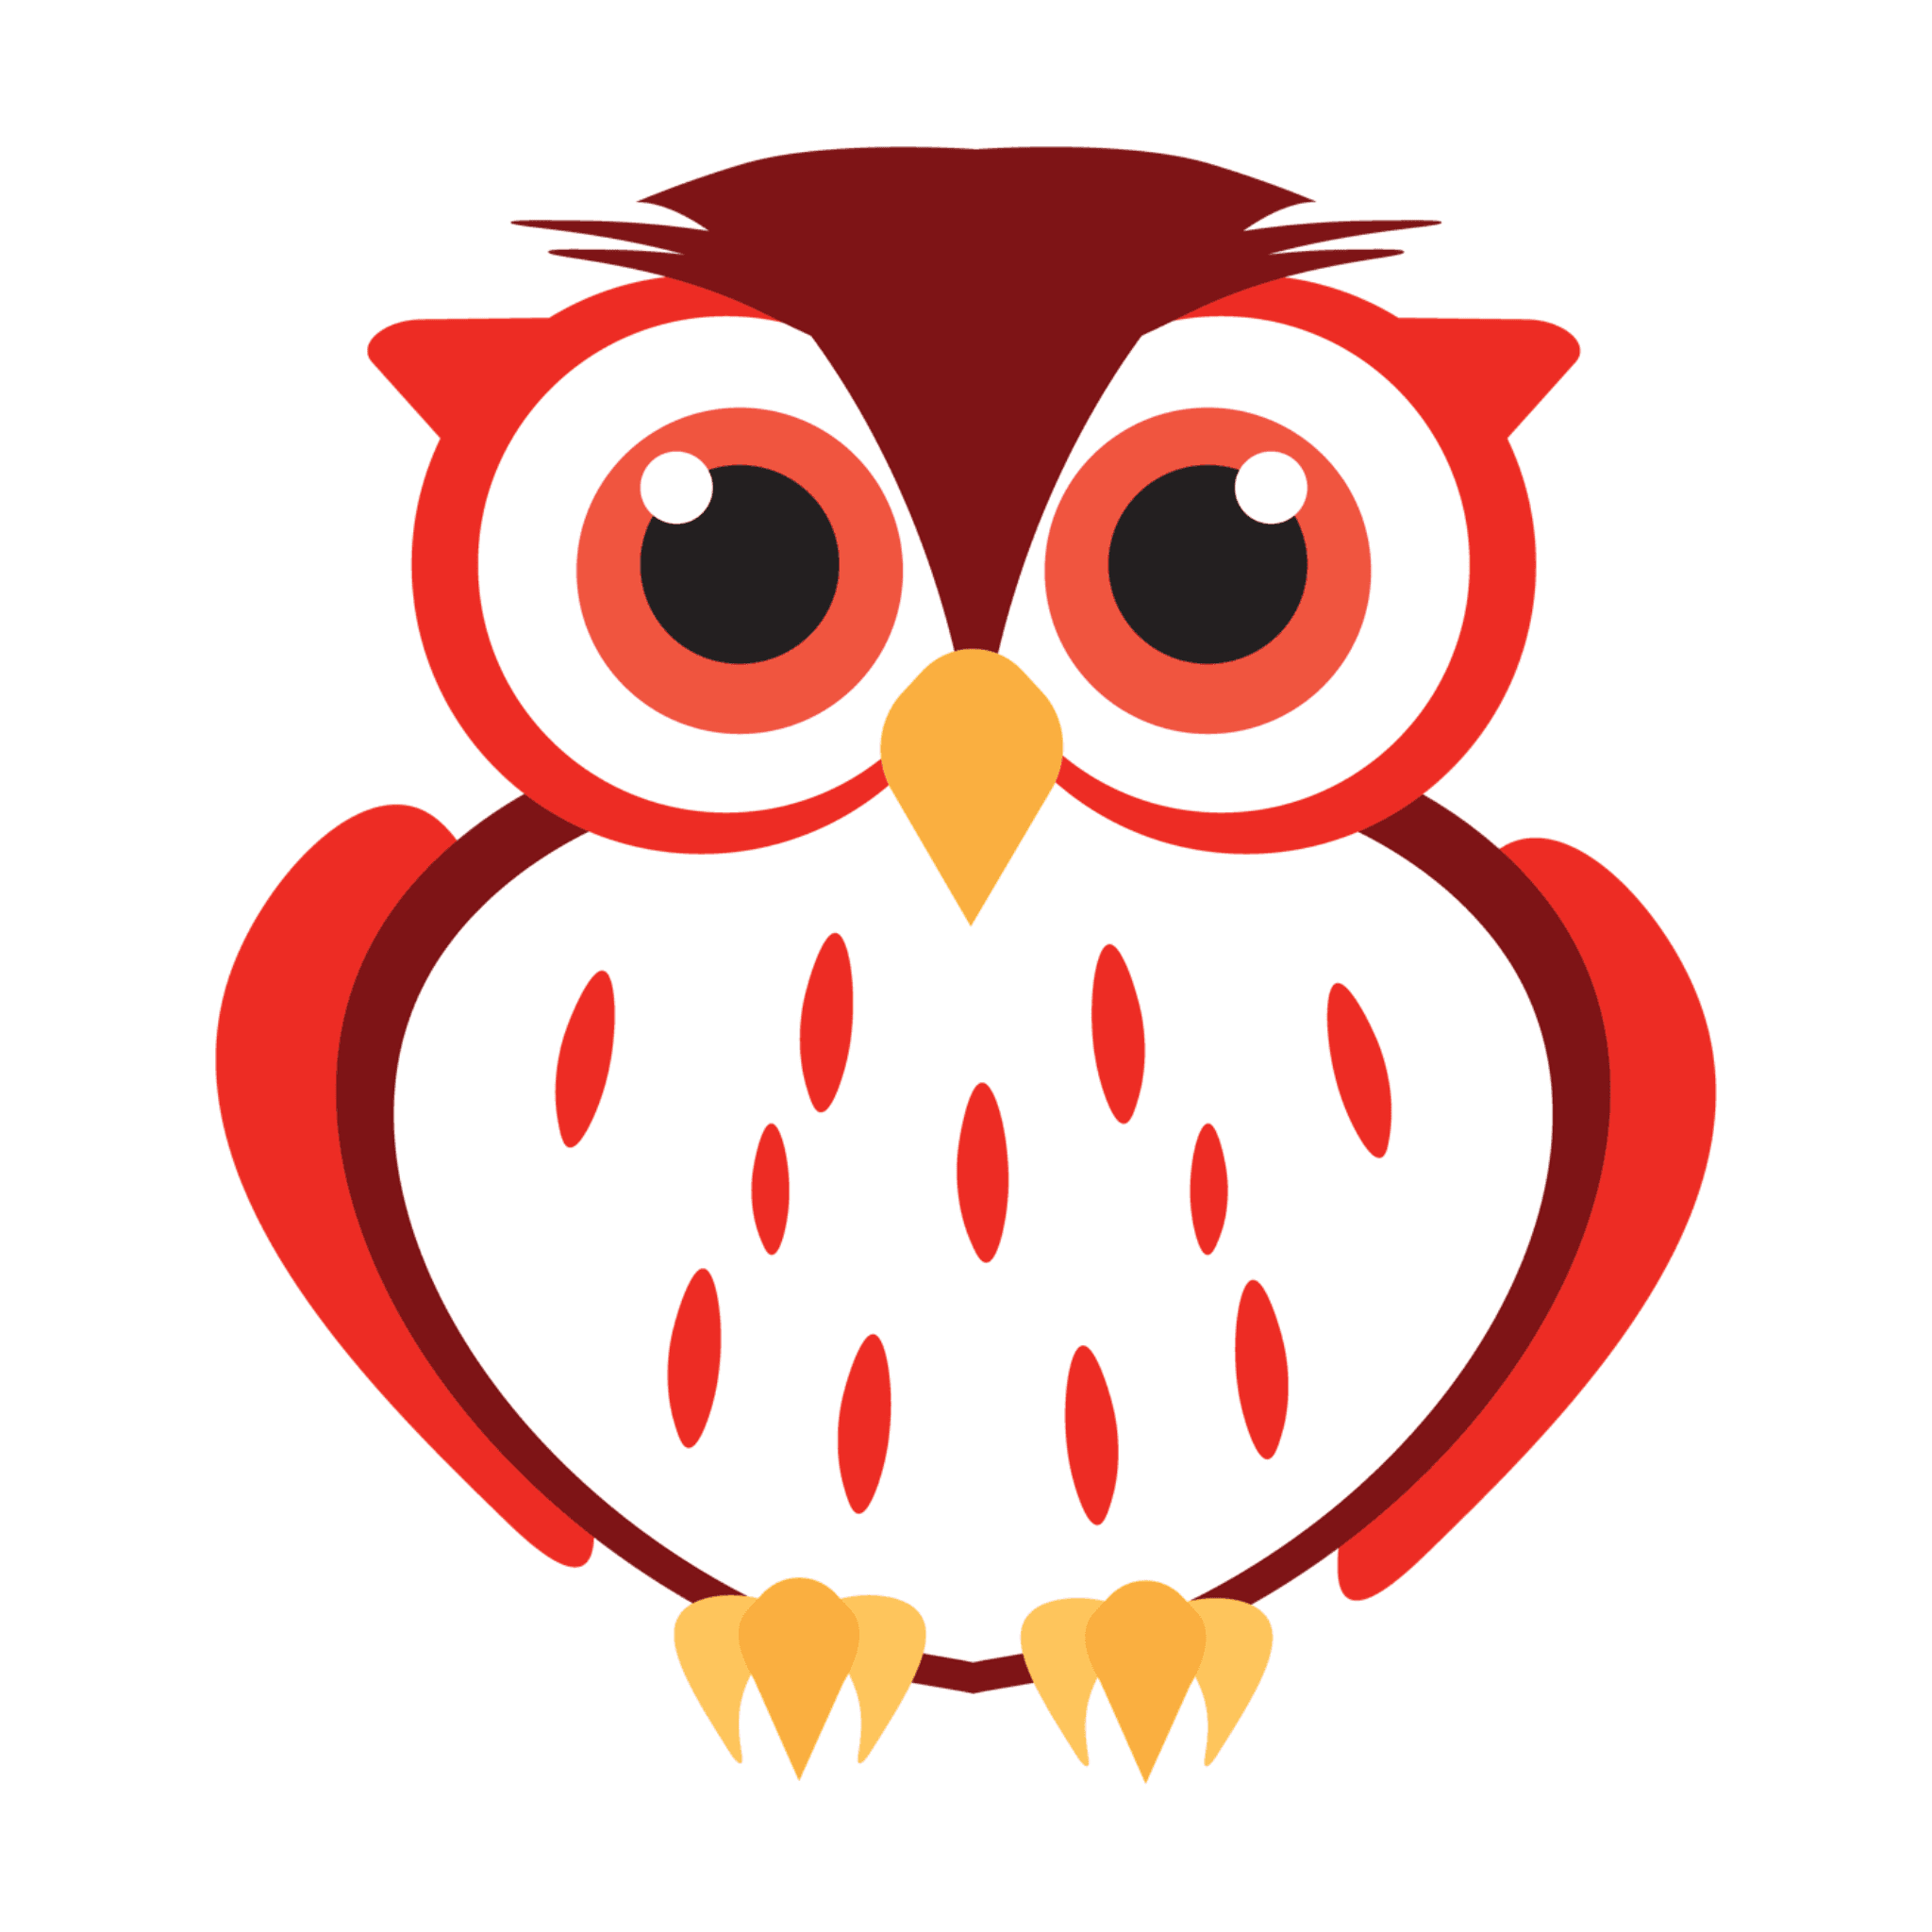 Ether Owl No. 2 - The Red One